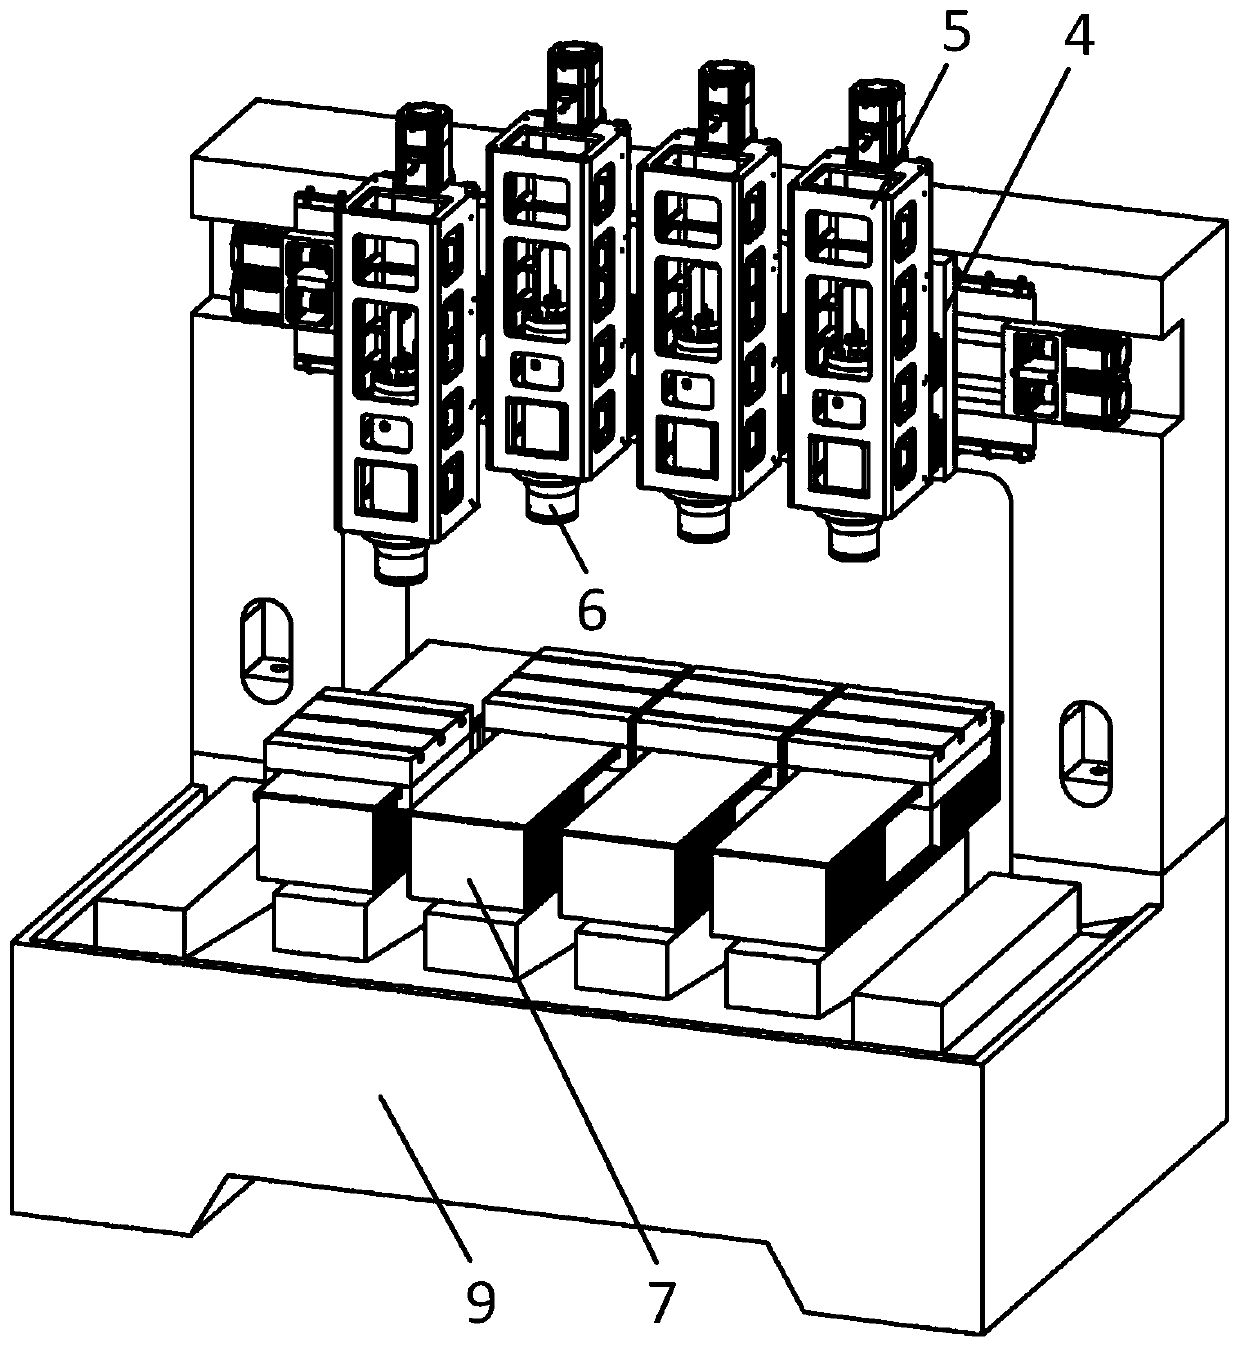 Parallel multi-channel CNC machine tool